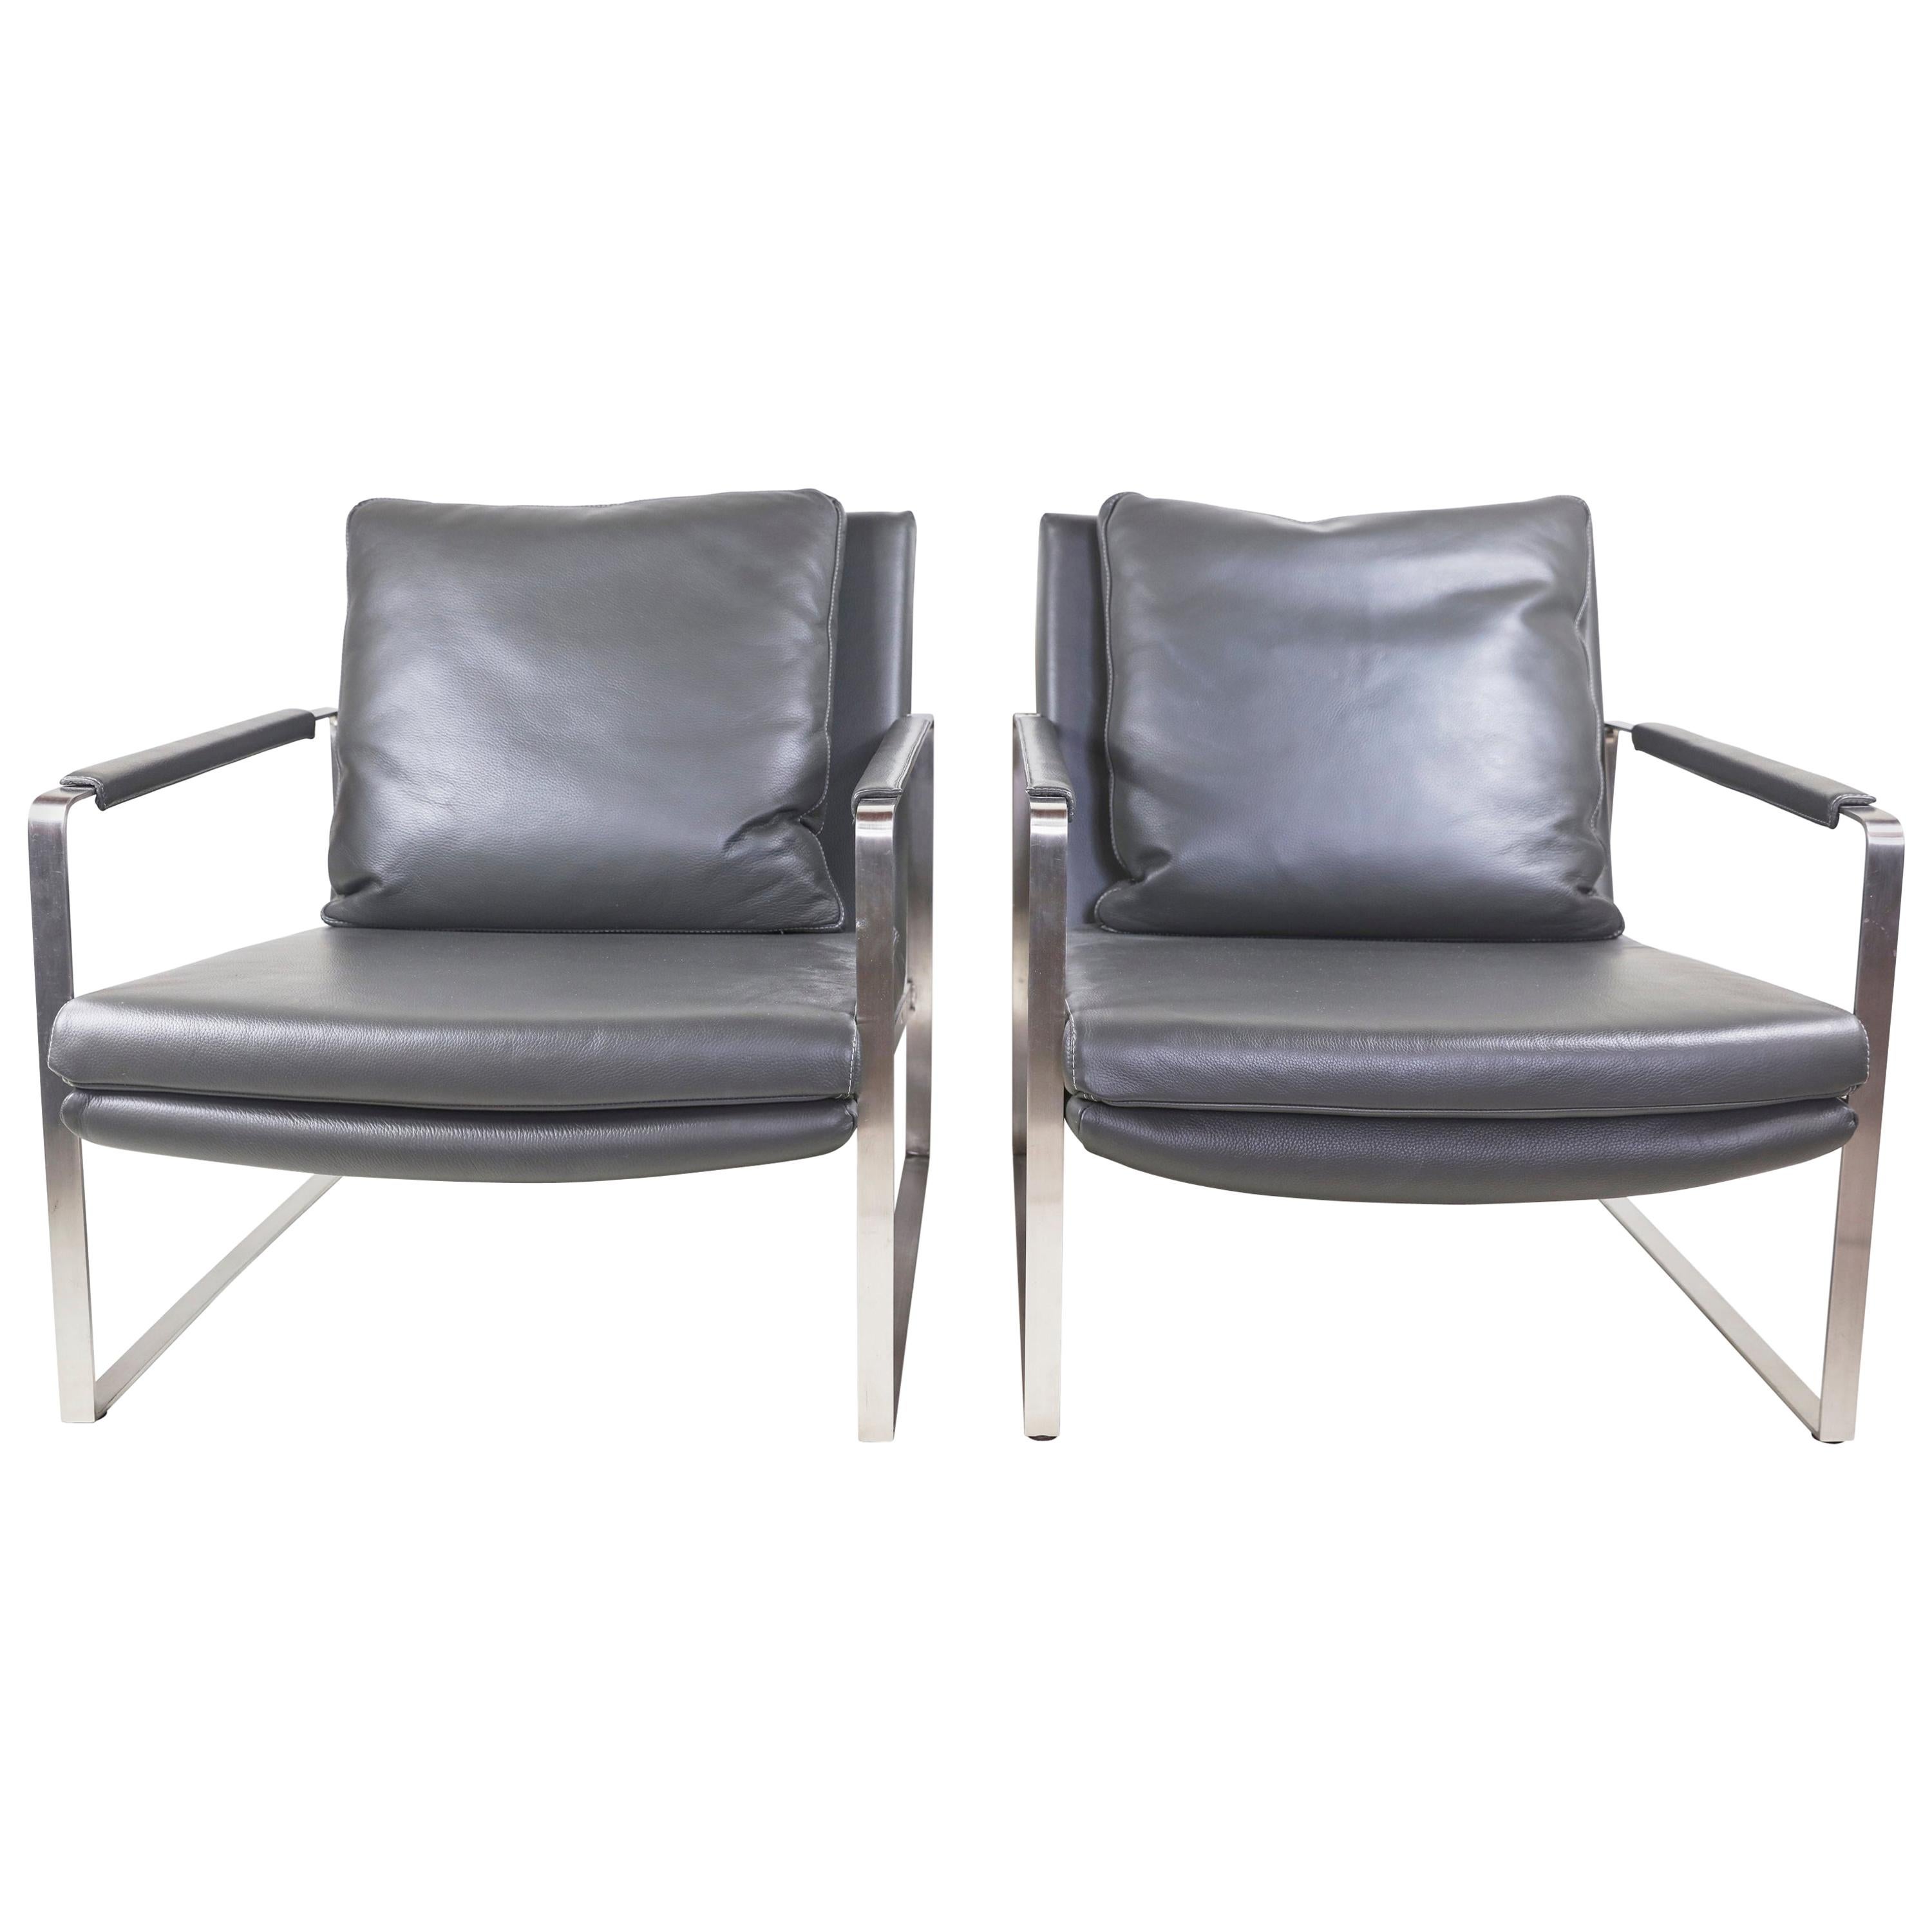 Chita Set of 2 Gray Leather Armchairs